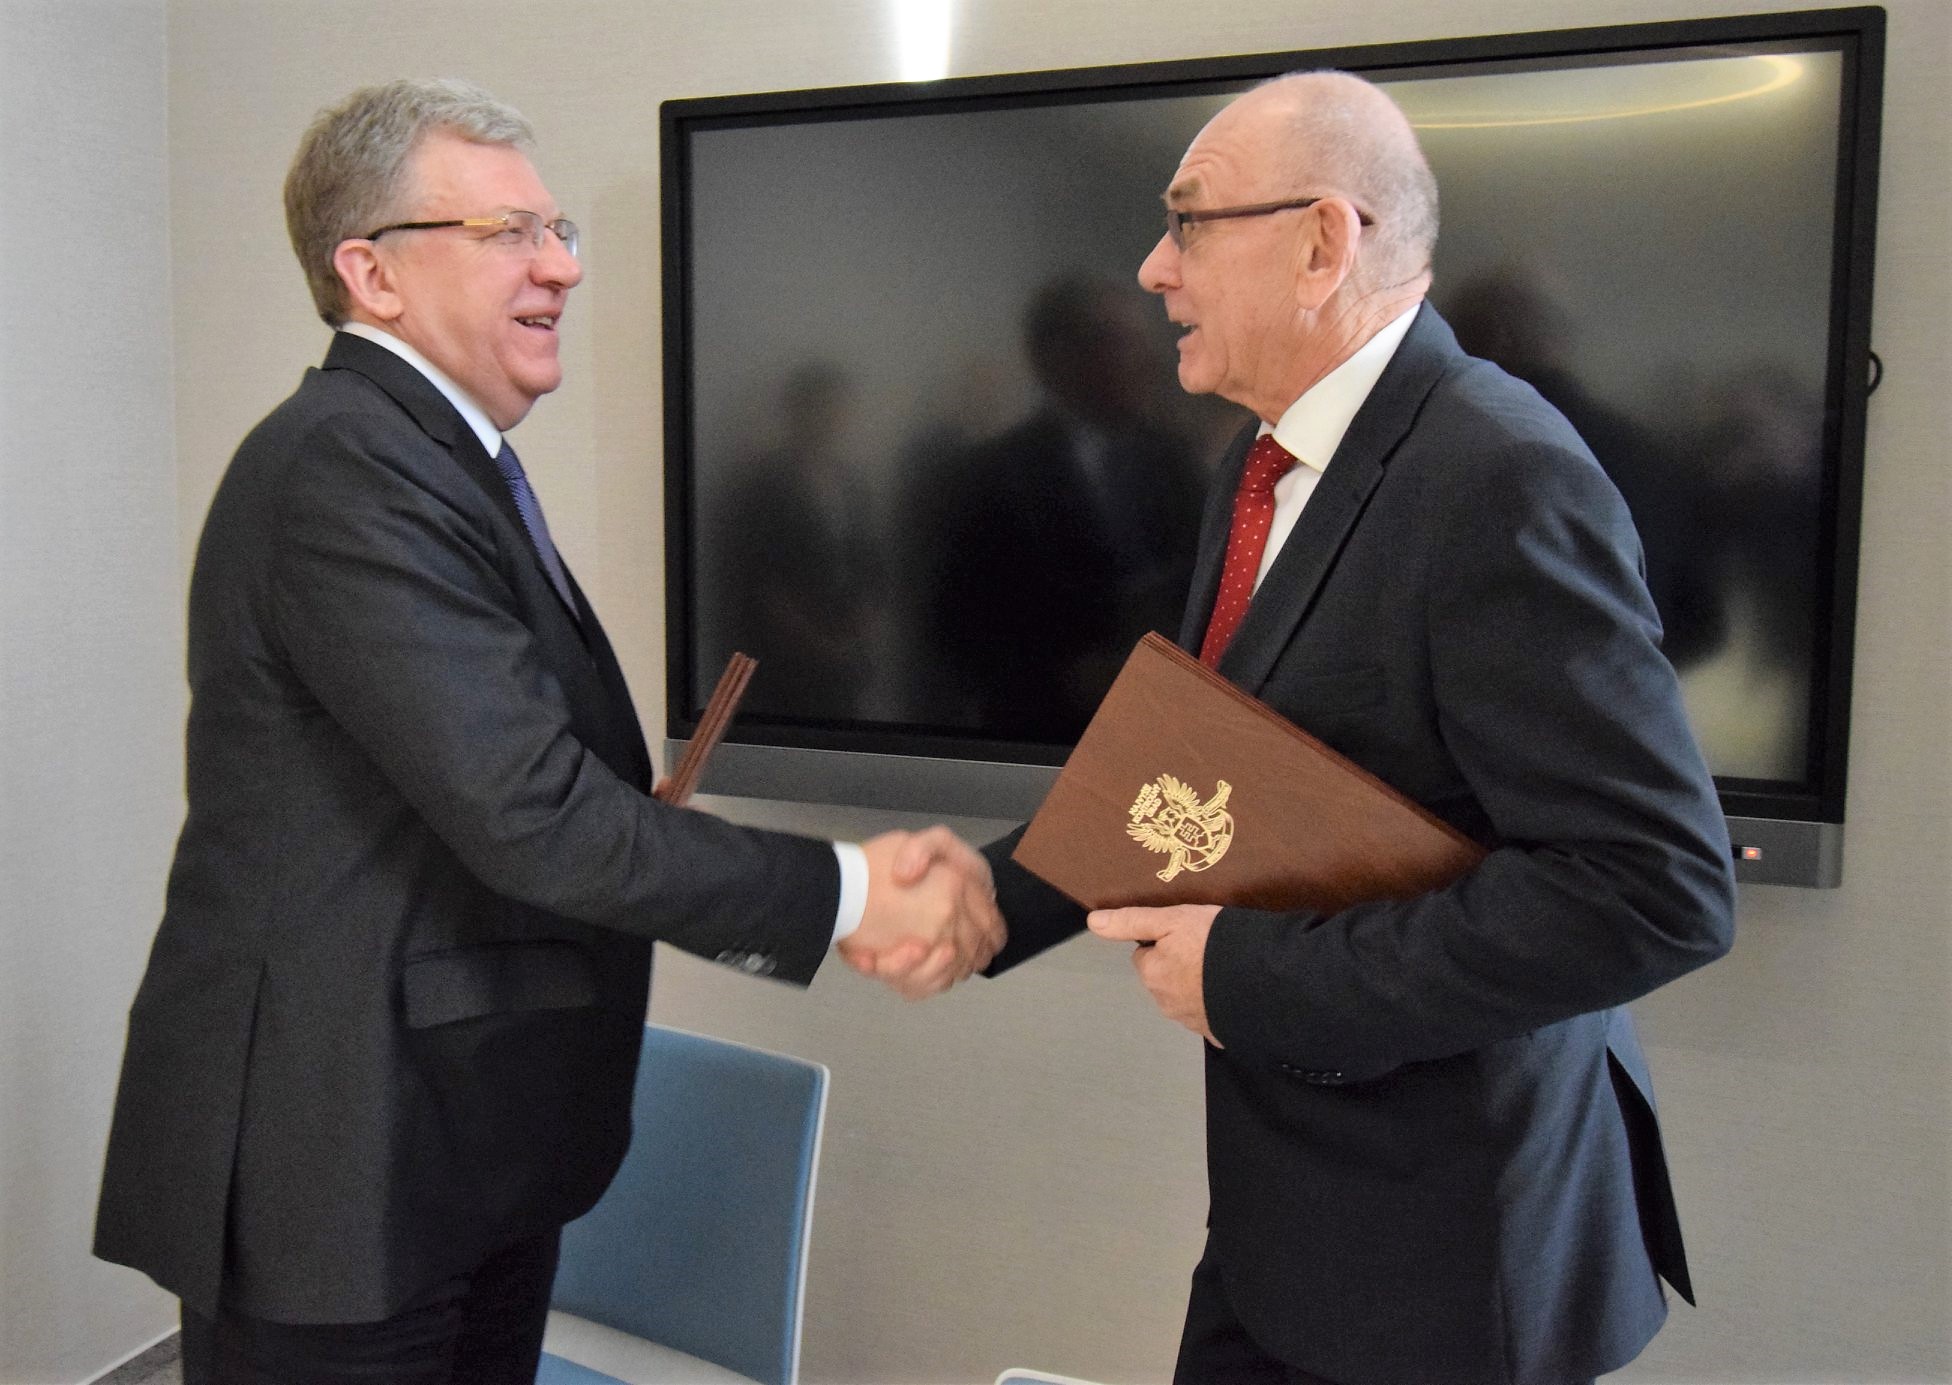 In the picture - From the right - President of the Supreme Audit Office of the Slovak Republic (SAO SR) Karol Mitrík and Chairman of the Accounts Chamber of the Russian Federation (ACRF) Aleksei Kudrin JPG (454 kB)